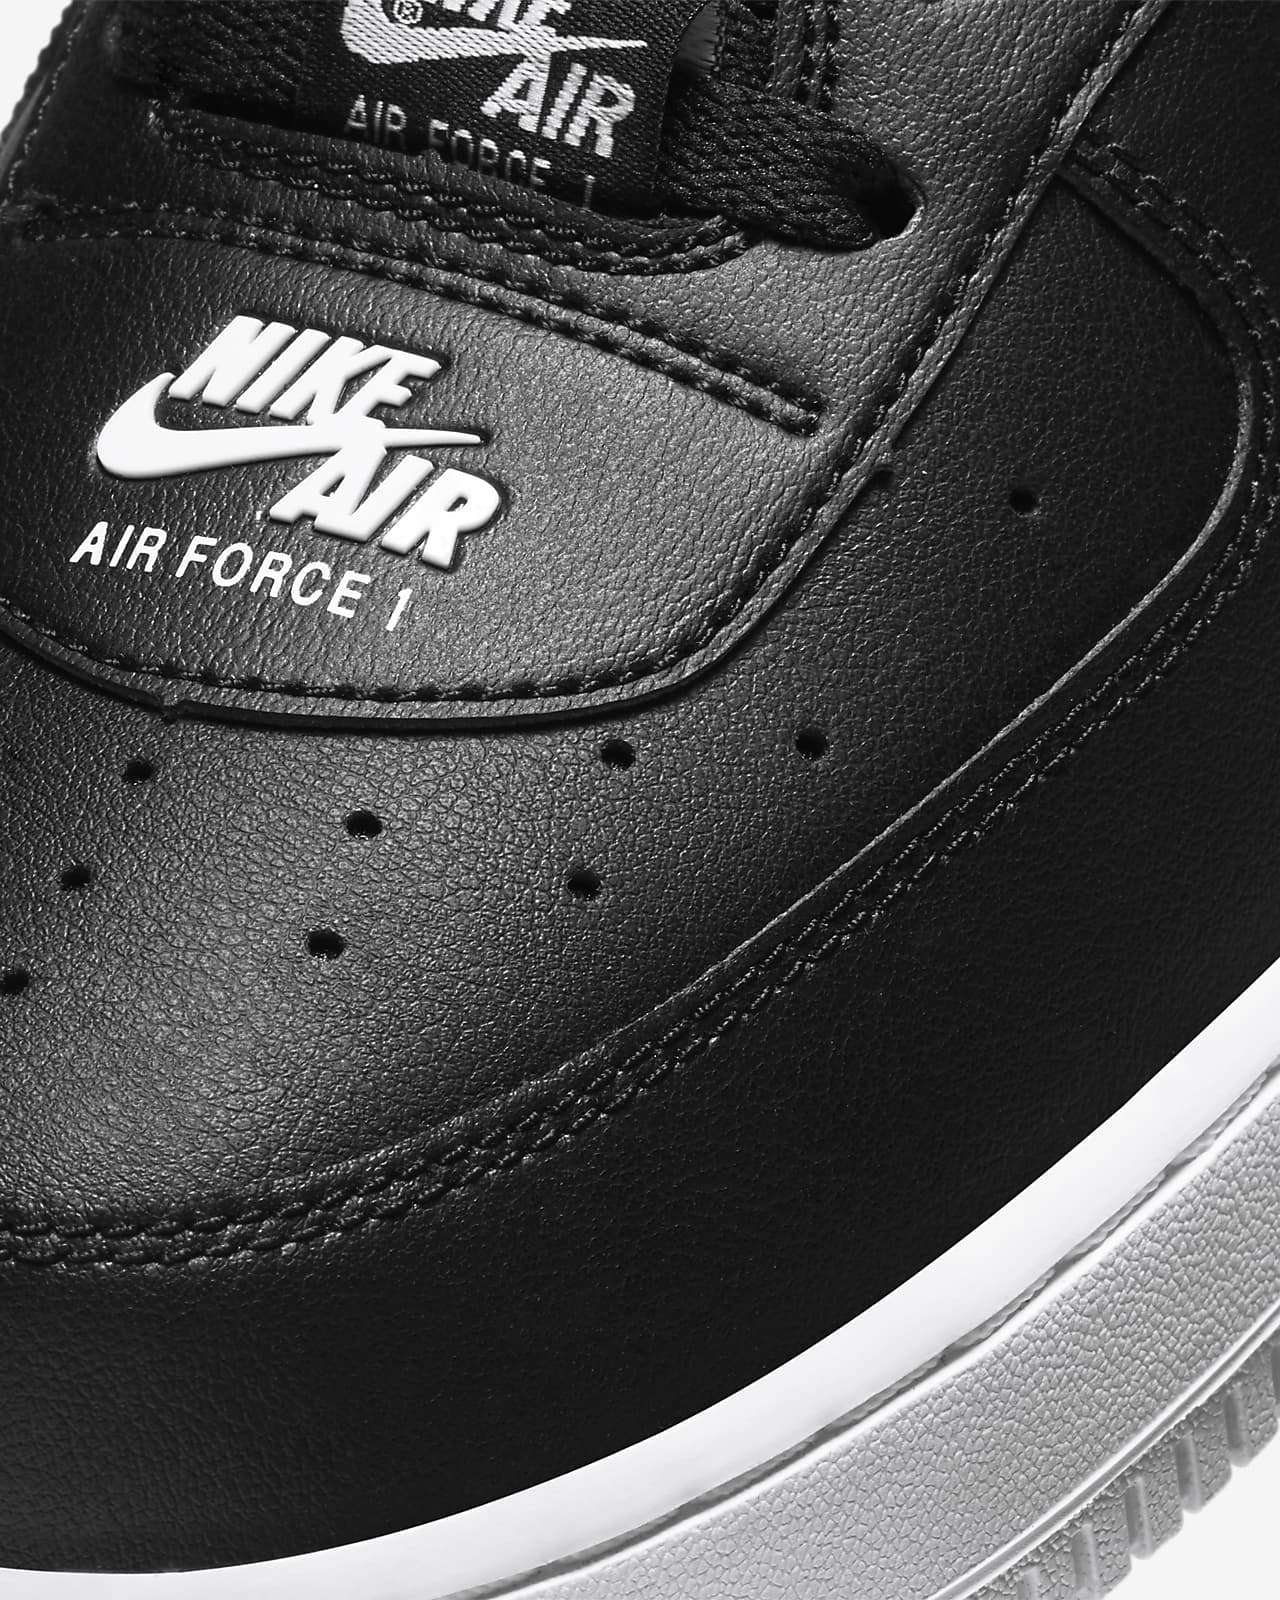 nike shoes air force 1 black and white